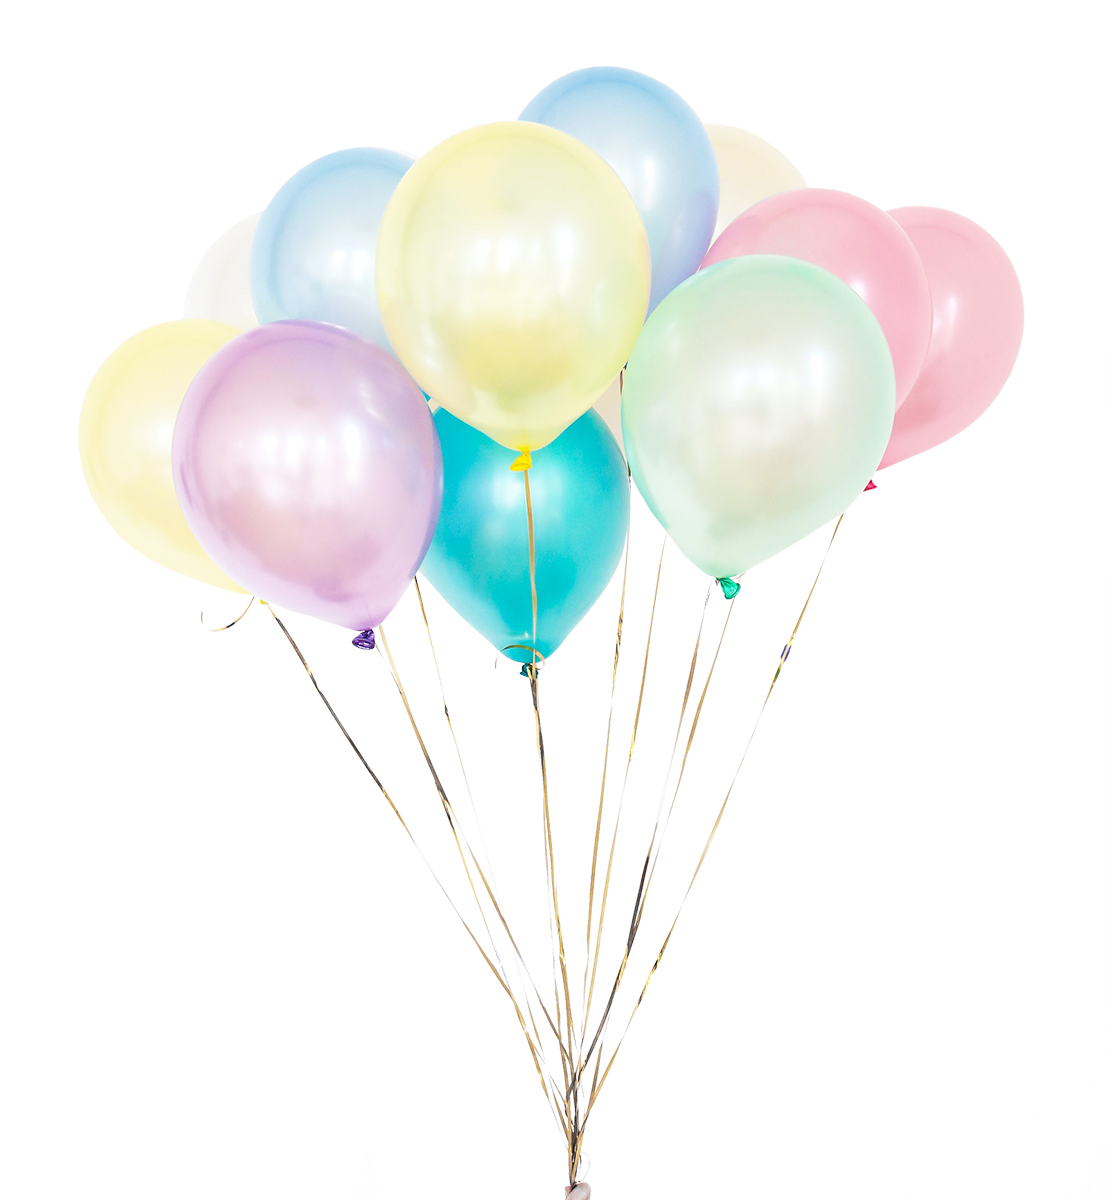 balloons image, balloons png, transparent balloons png, balloons PNG image, balloons png photo, colorful balloons png hd images download